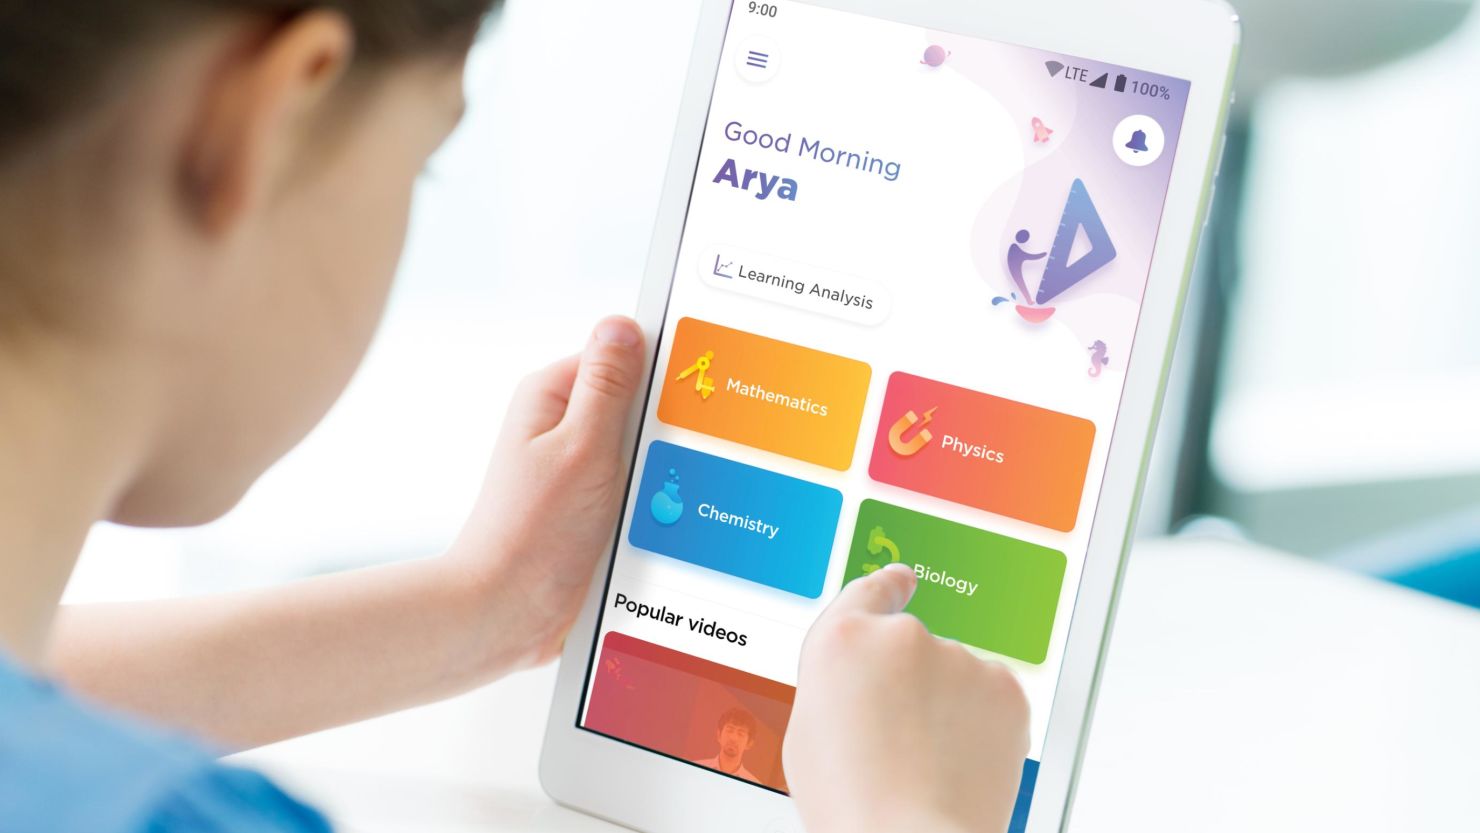 Byju's education app has experienced a surge in users since it made access free.